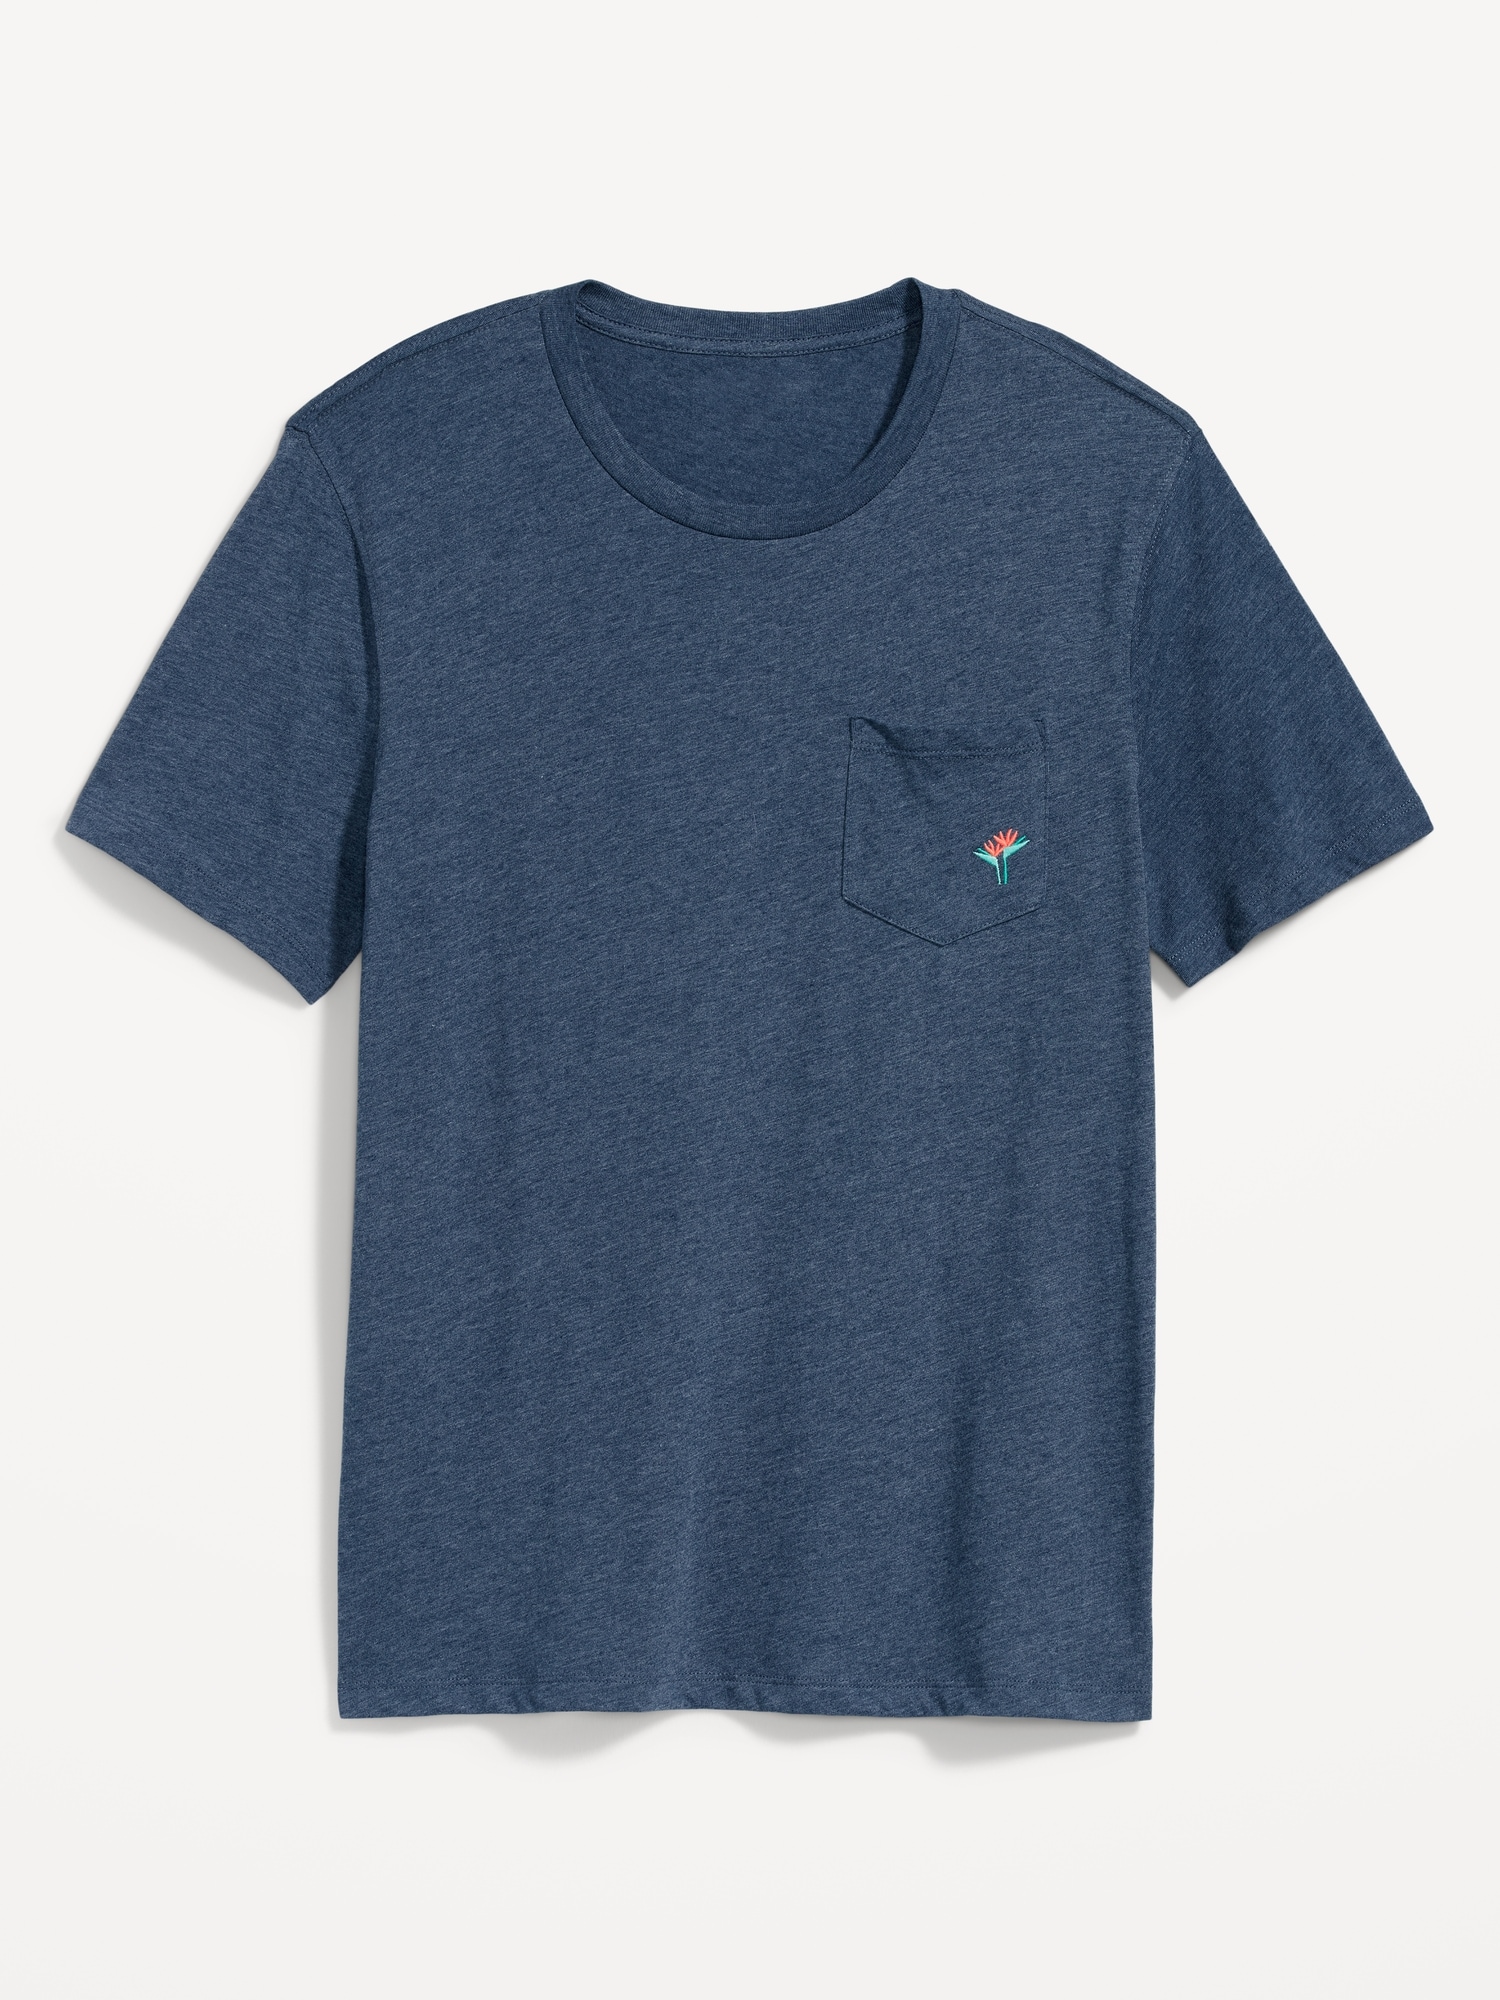 Soft-Washed Crew-Neck Graphic-Pocket T-Shirt | Old Navy